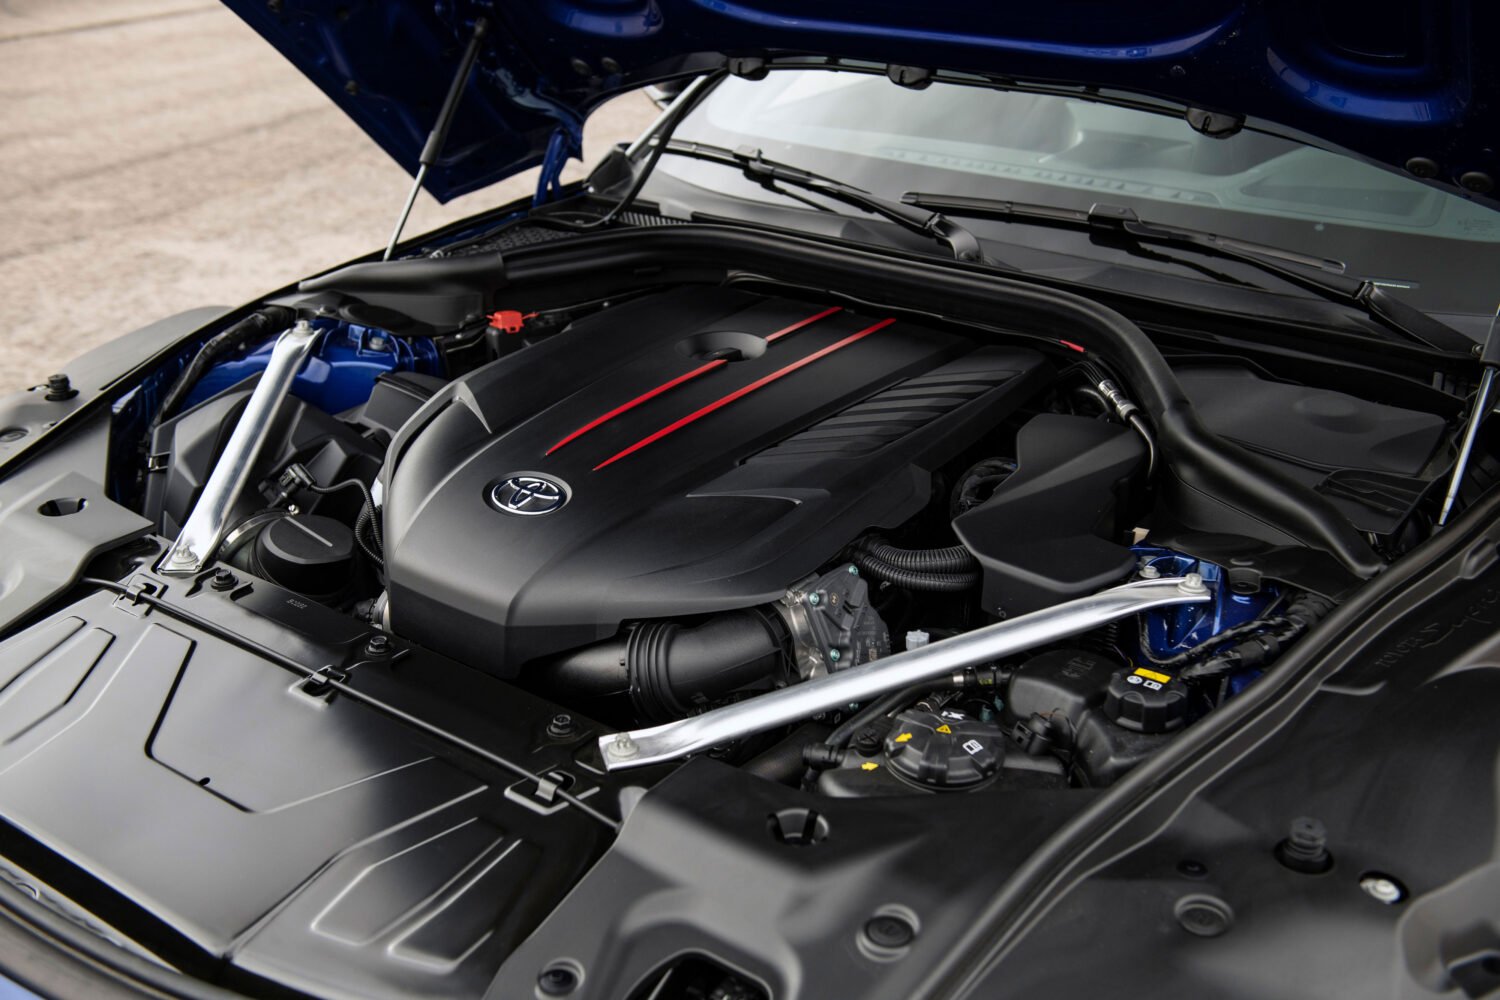 BMW's B58 engine, also found in the Toyota GR Supra, praised as one of the brand's best engines ever made